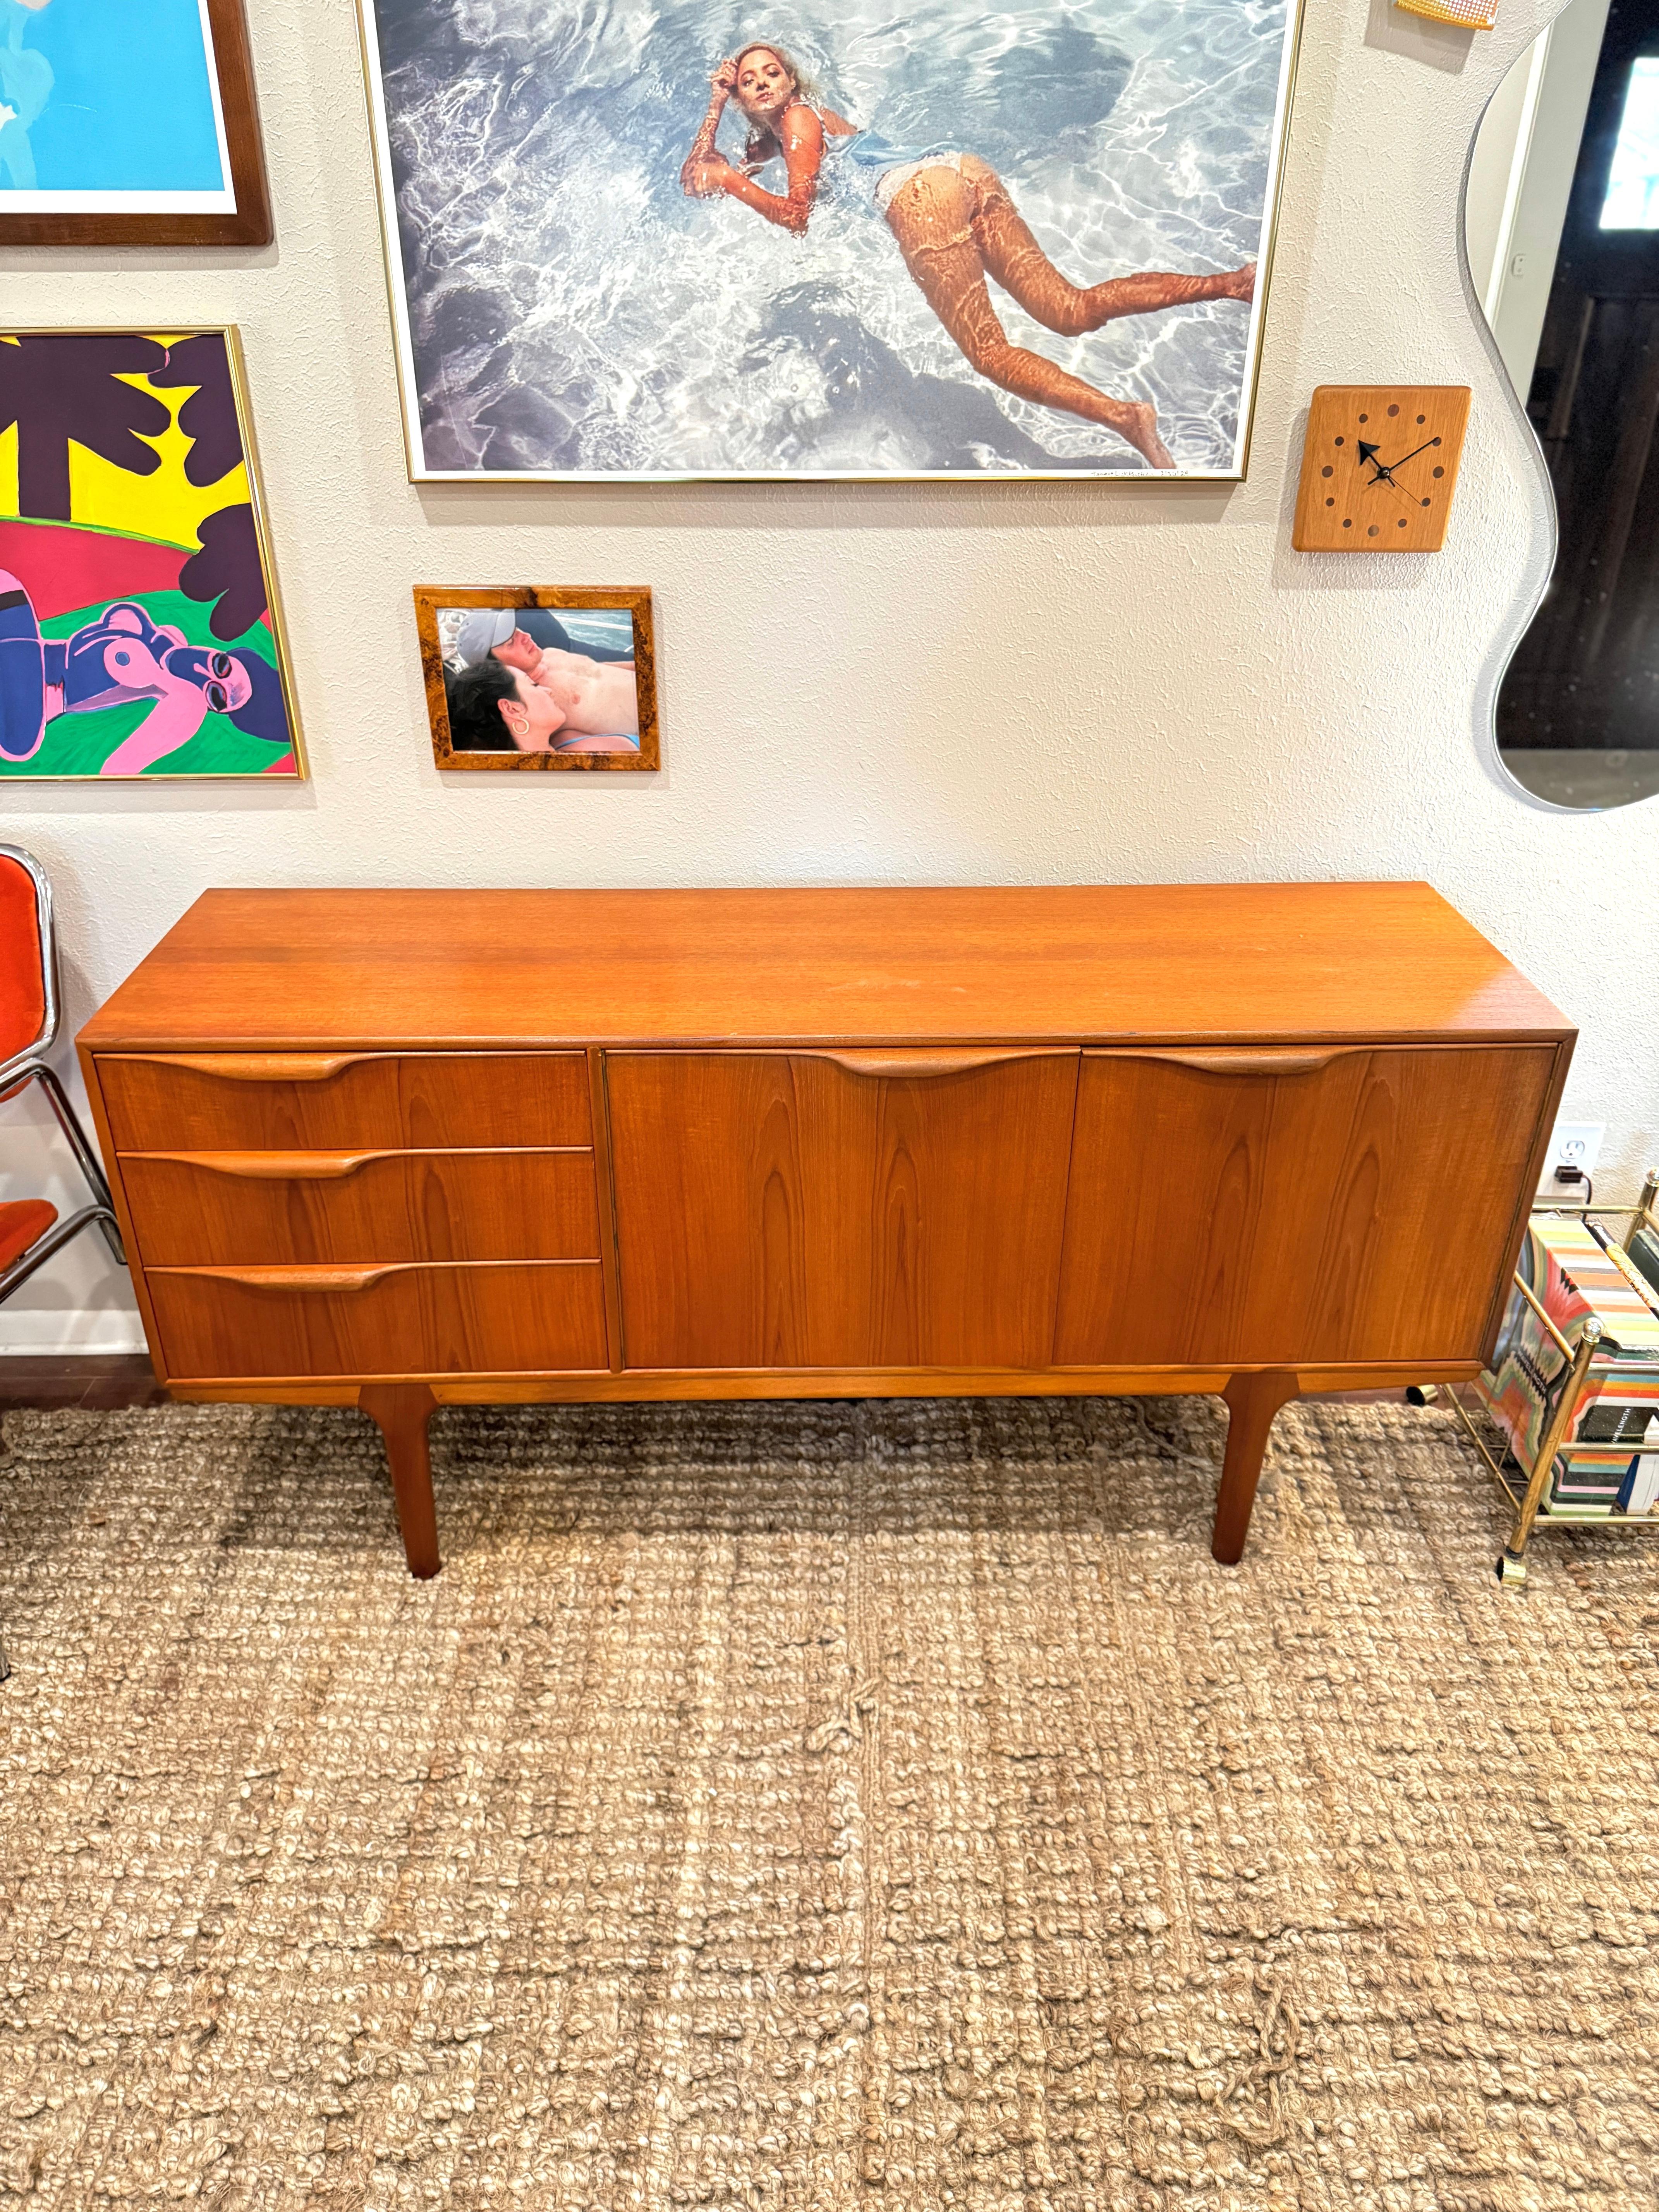 Vintage mid century modern sideboard with folded handles made by McIntosh 4